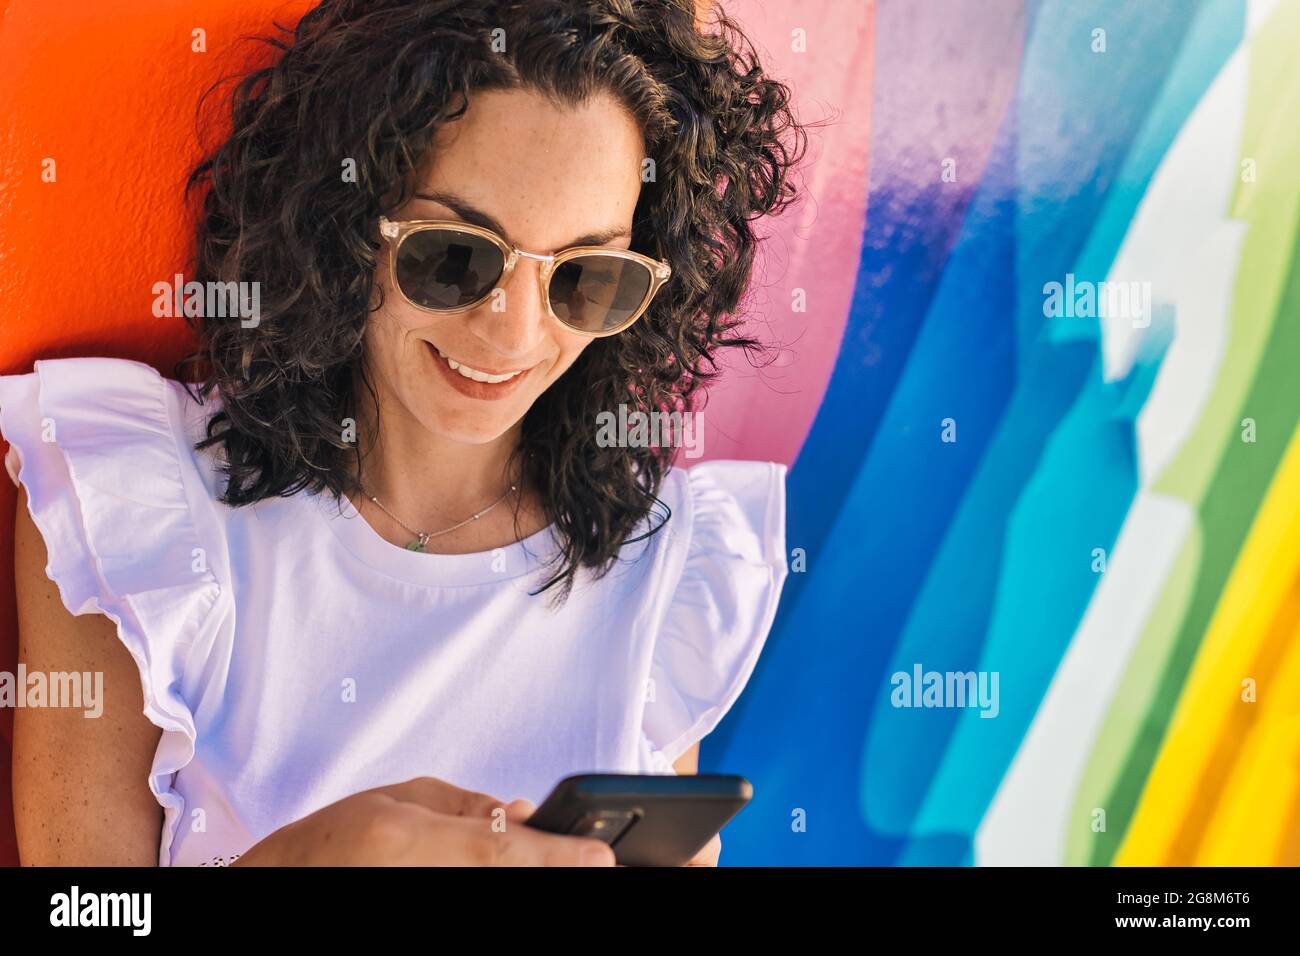 young woman with curly black hair has fun chatting with her mobile sitting on a colorful wall in the street. Stock Photo